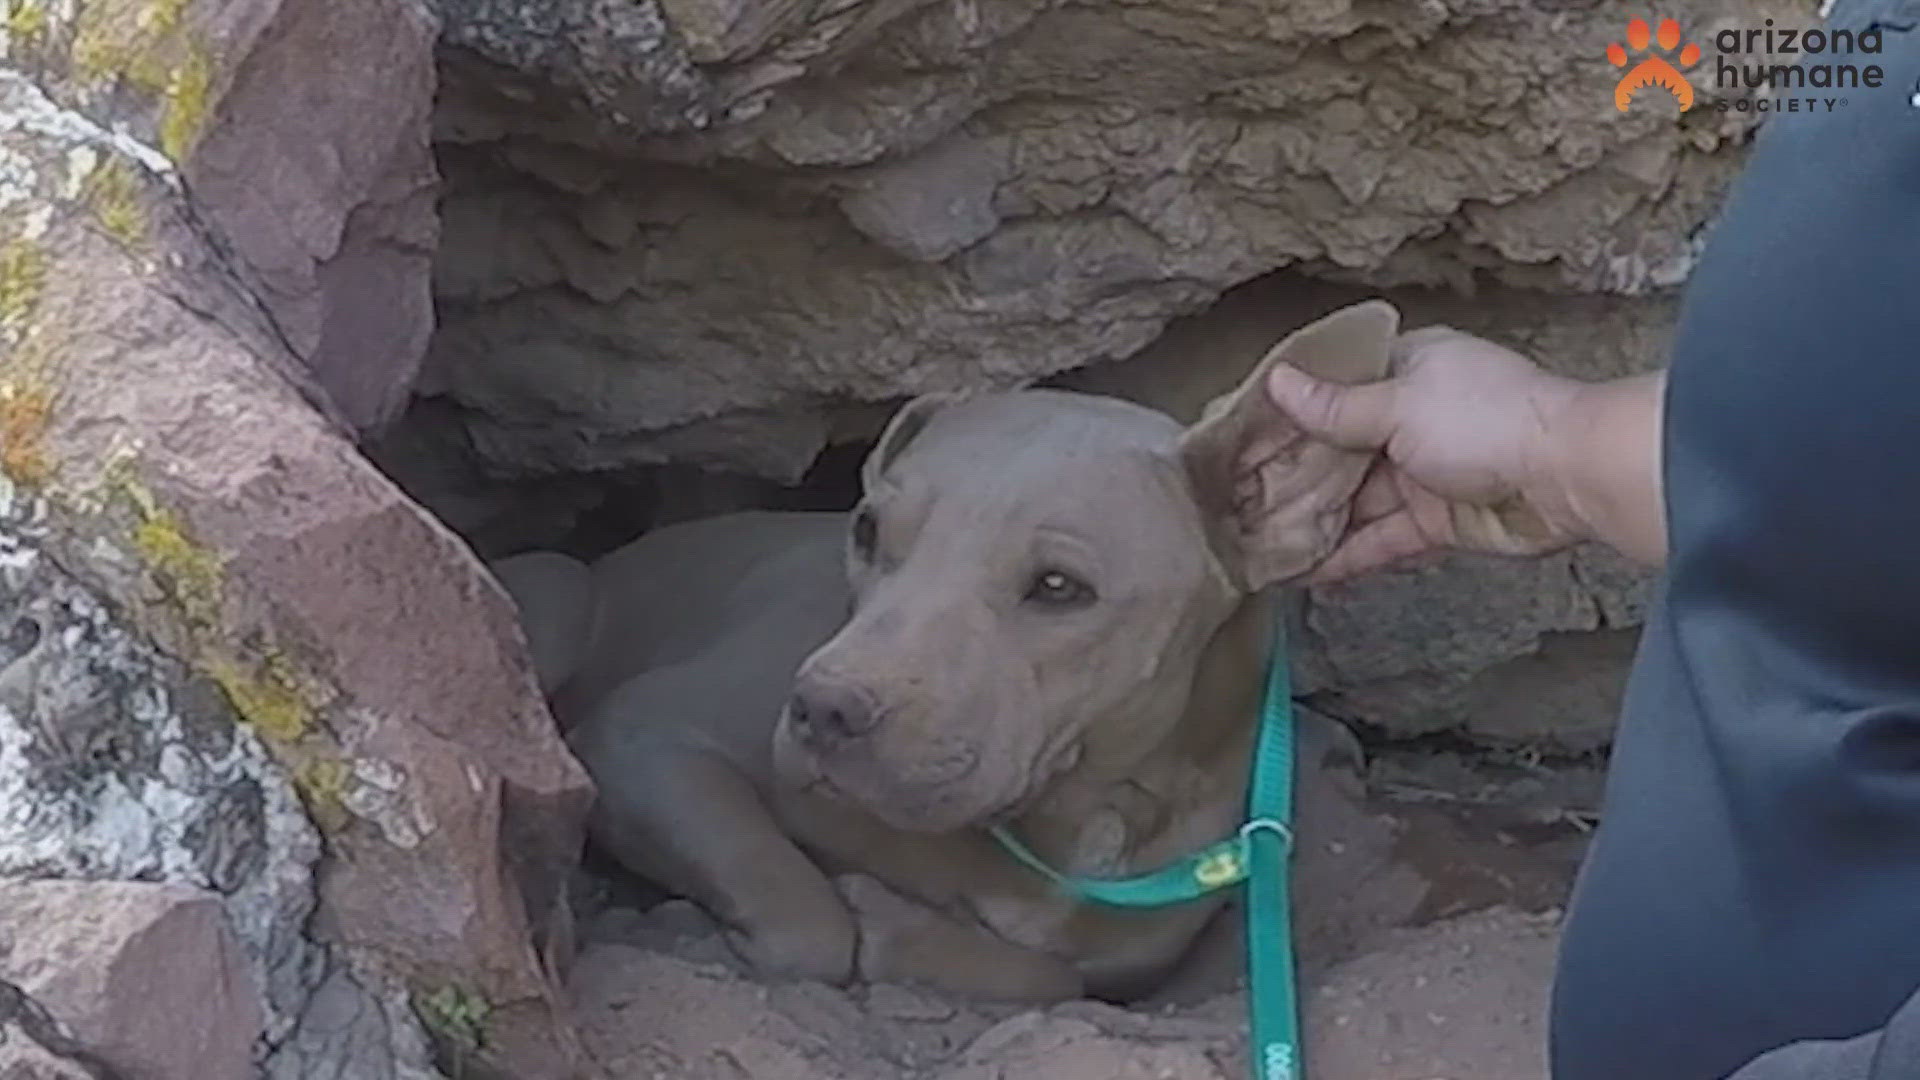 The 2-year-old Sharpei mix, now named Bright Eyes, is now being taken care of at the Arizona Humane Society.